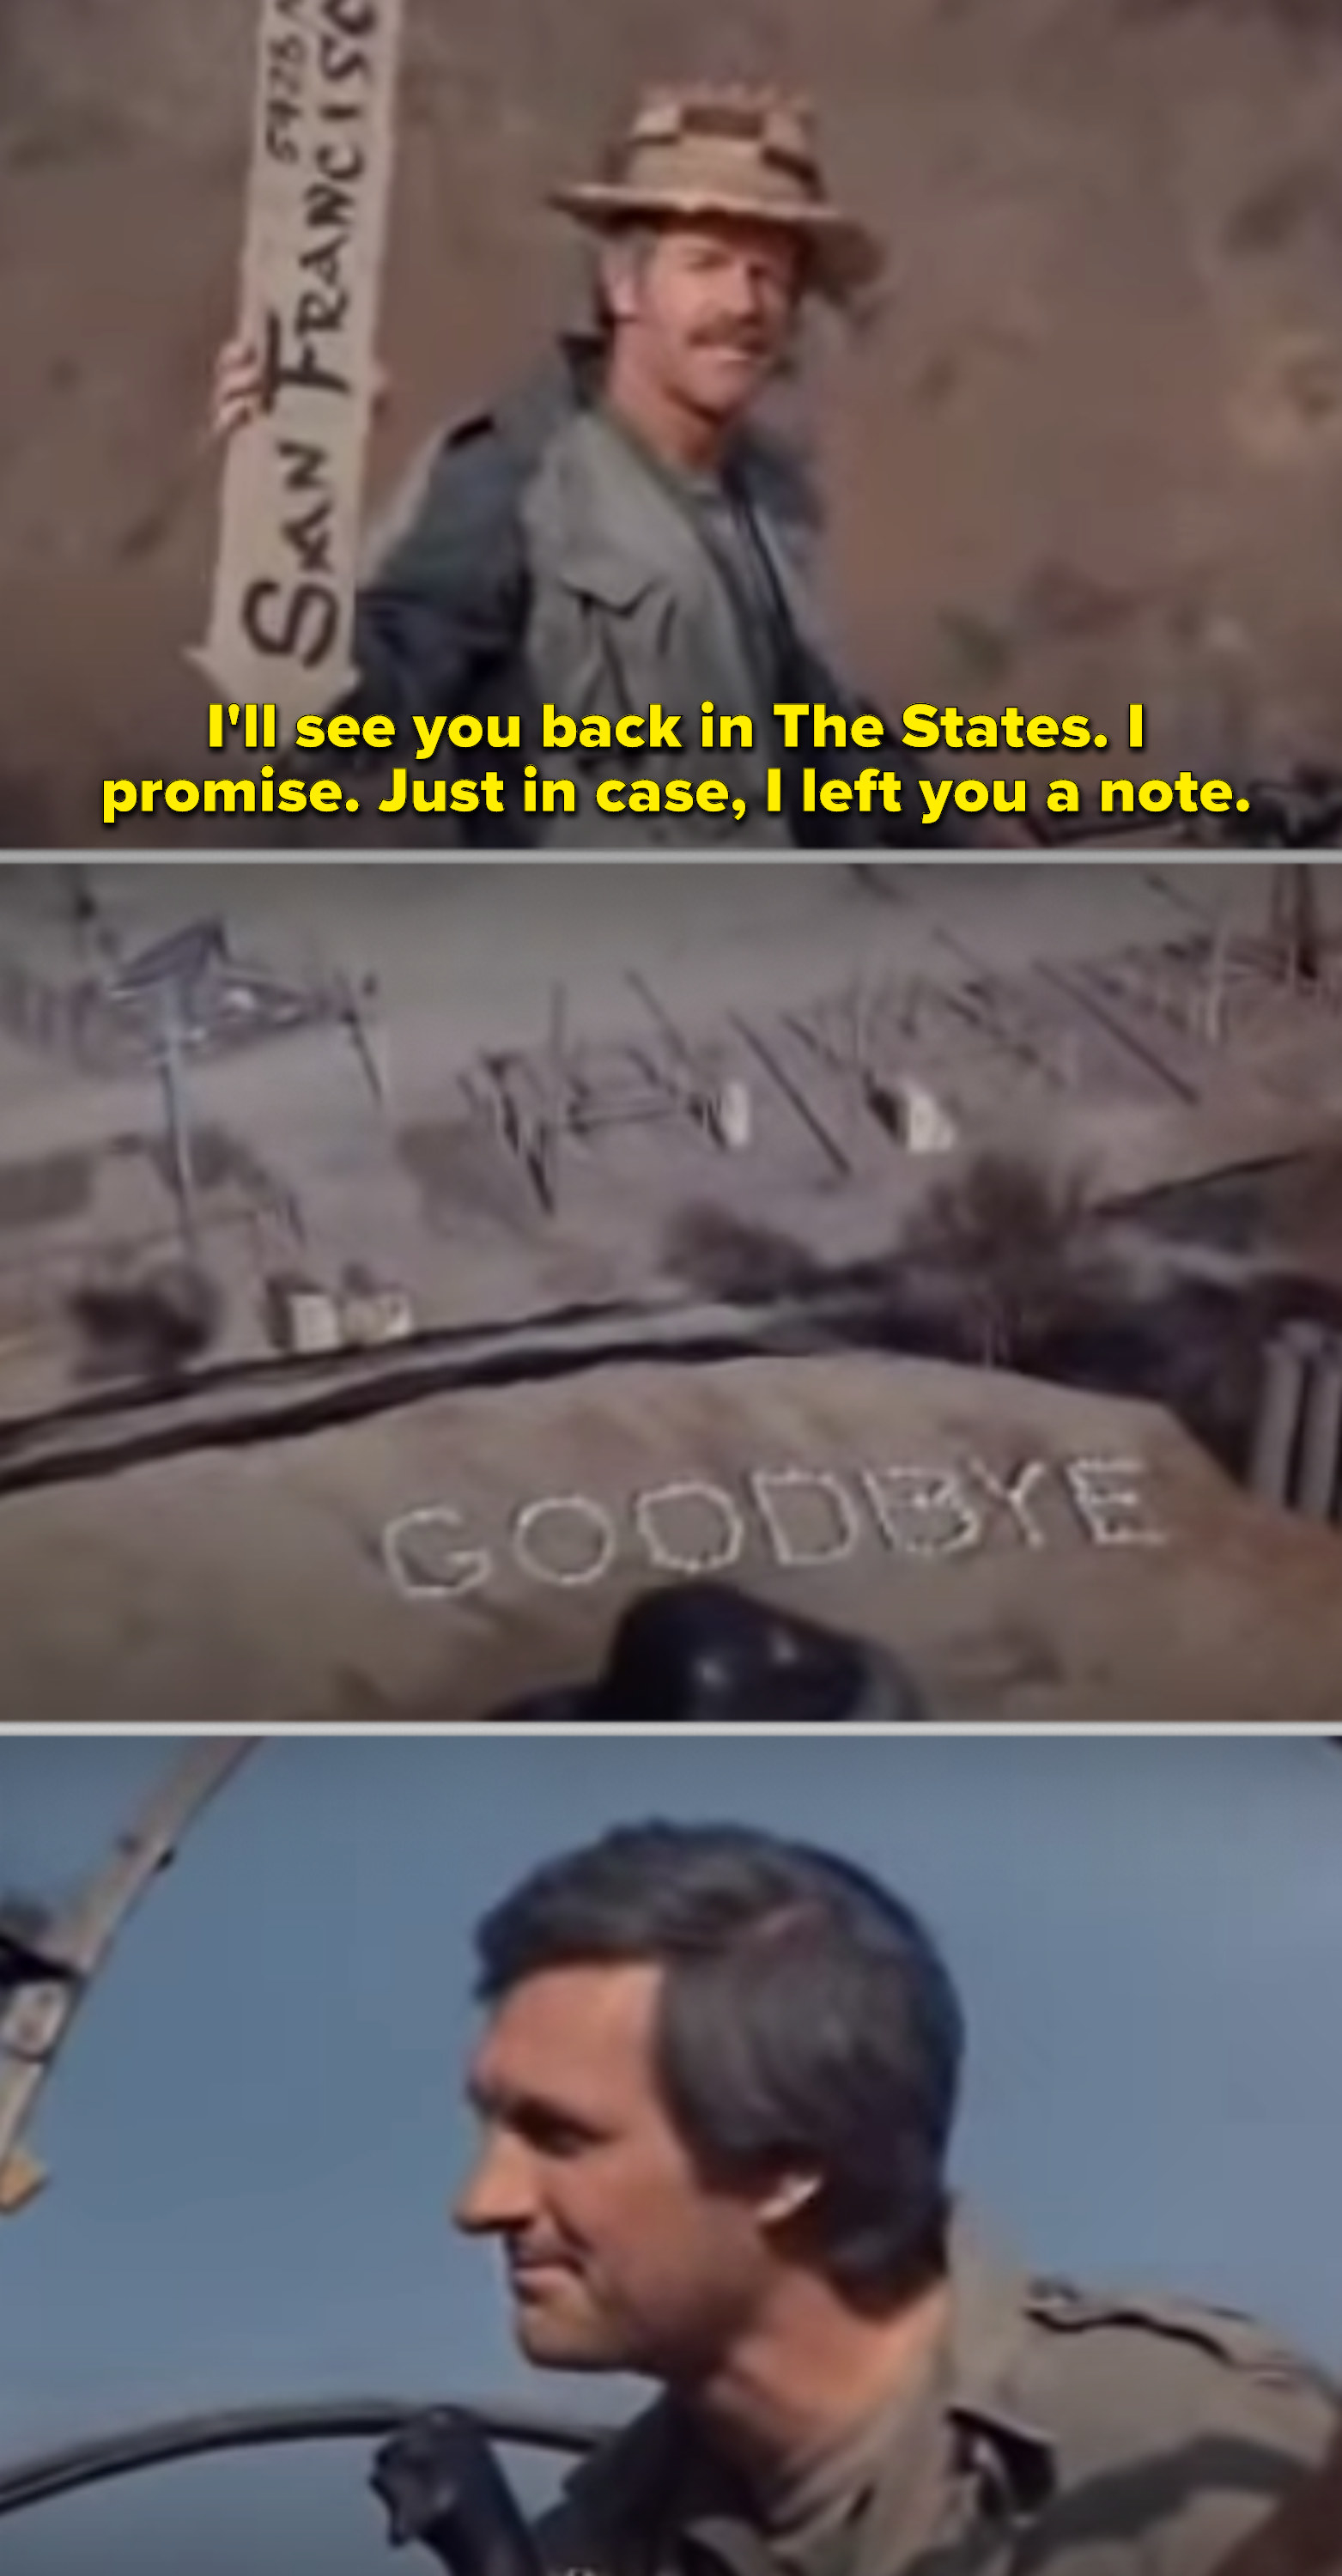 Hawkeye in a helicopter, looking down at the &quot;goodbye&quot; note that B.J. wrote for him using rocks